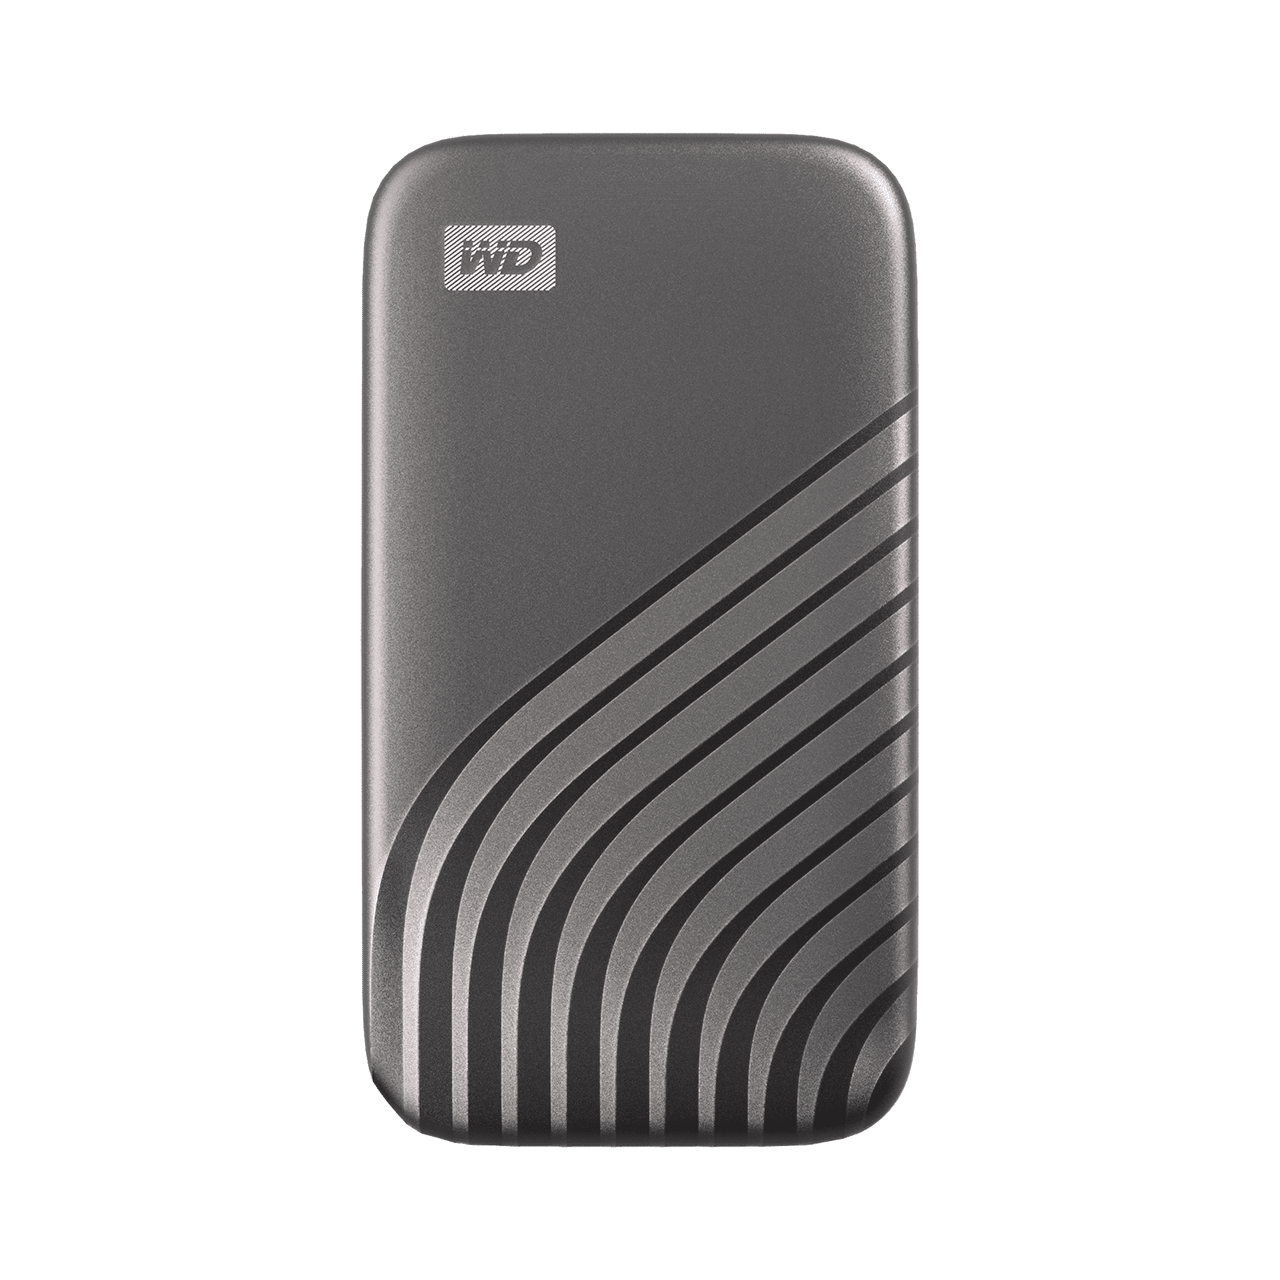 WD Western Digital My Passport SSD Portable External SSD with USB 3.2 Gen 2, Up To 1050mb/s Read Password Protection, Simple Back Up, Shock Resistant (500GB / 1TB / 2TB)